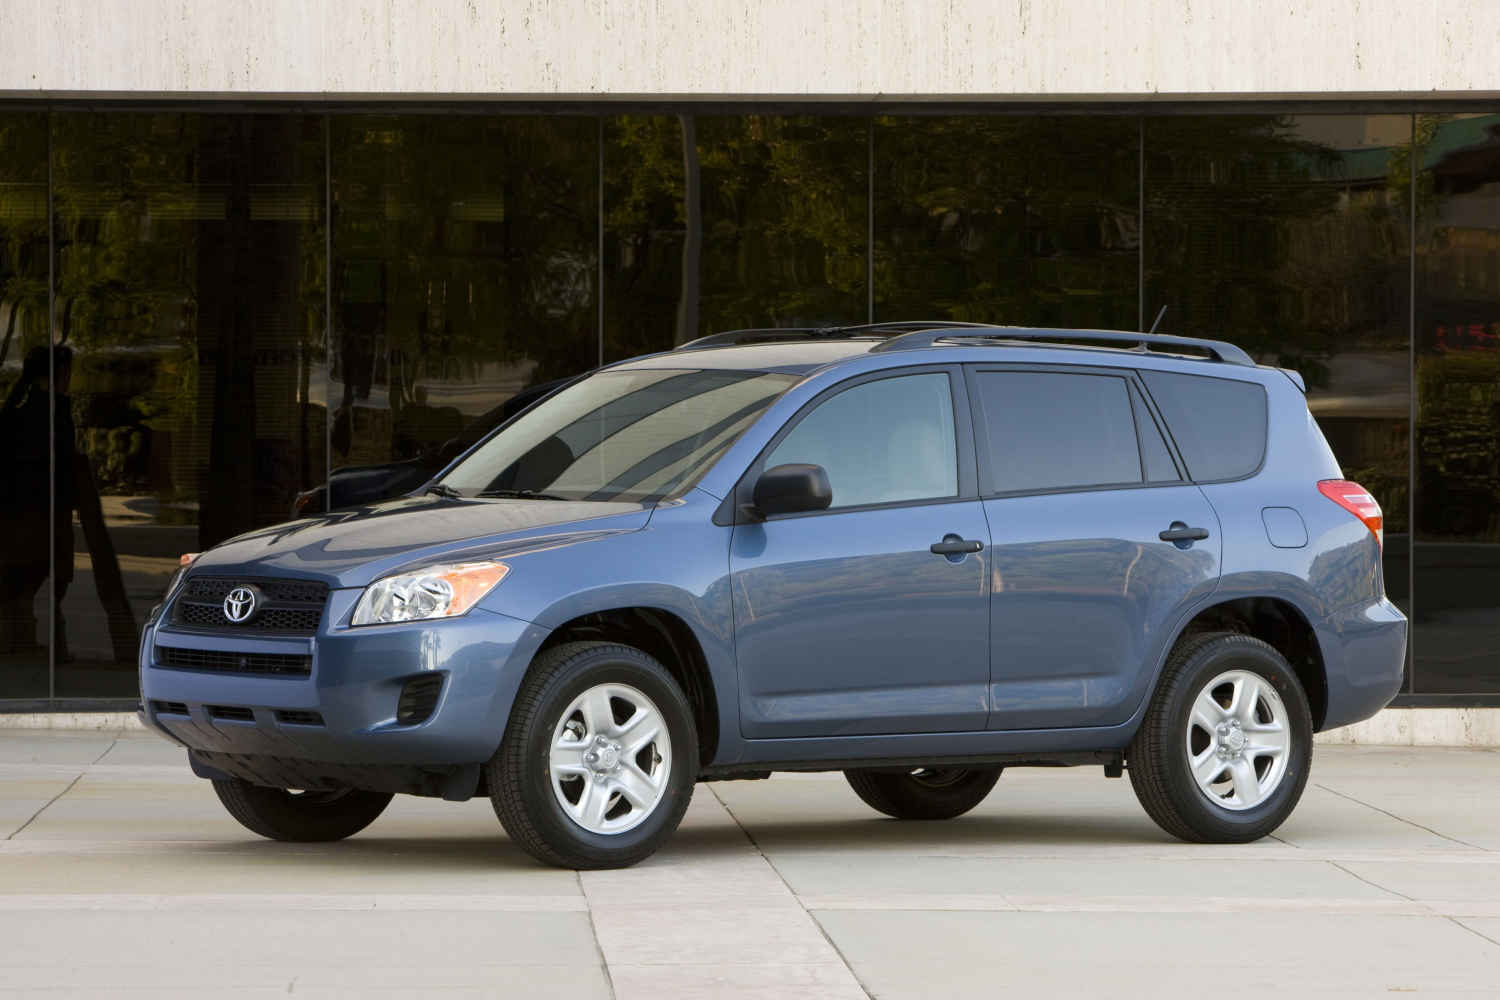 2012 is a good used Toyota RAV4 year